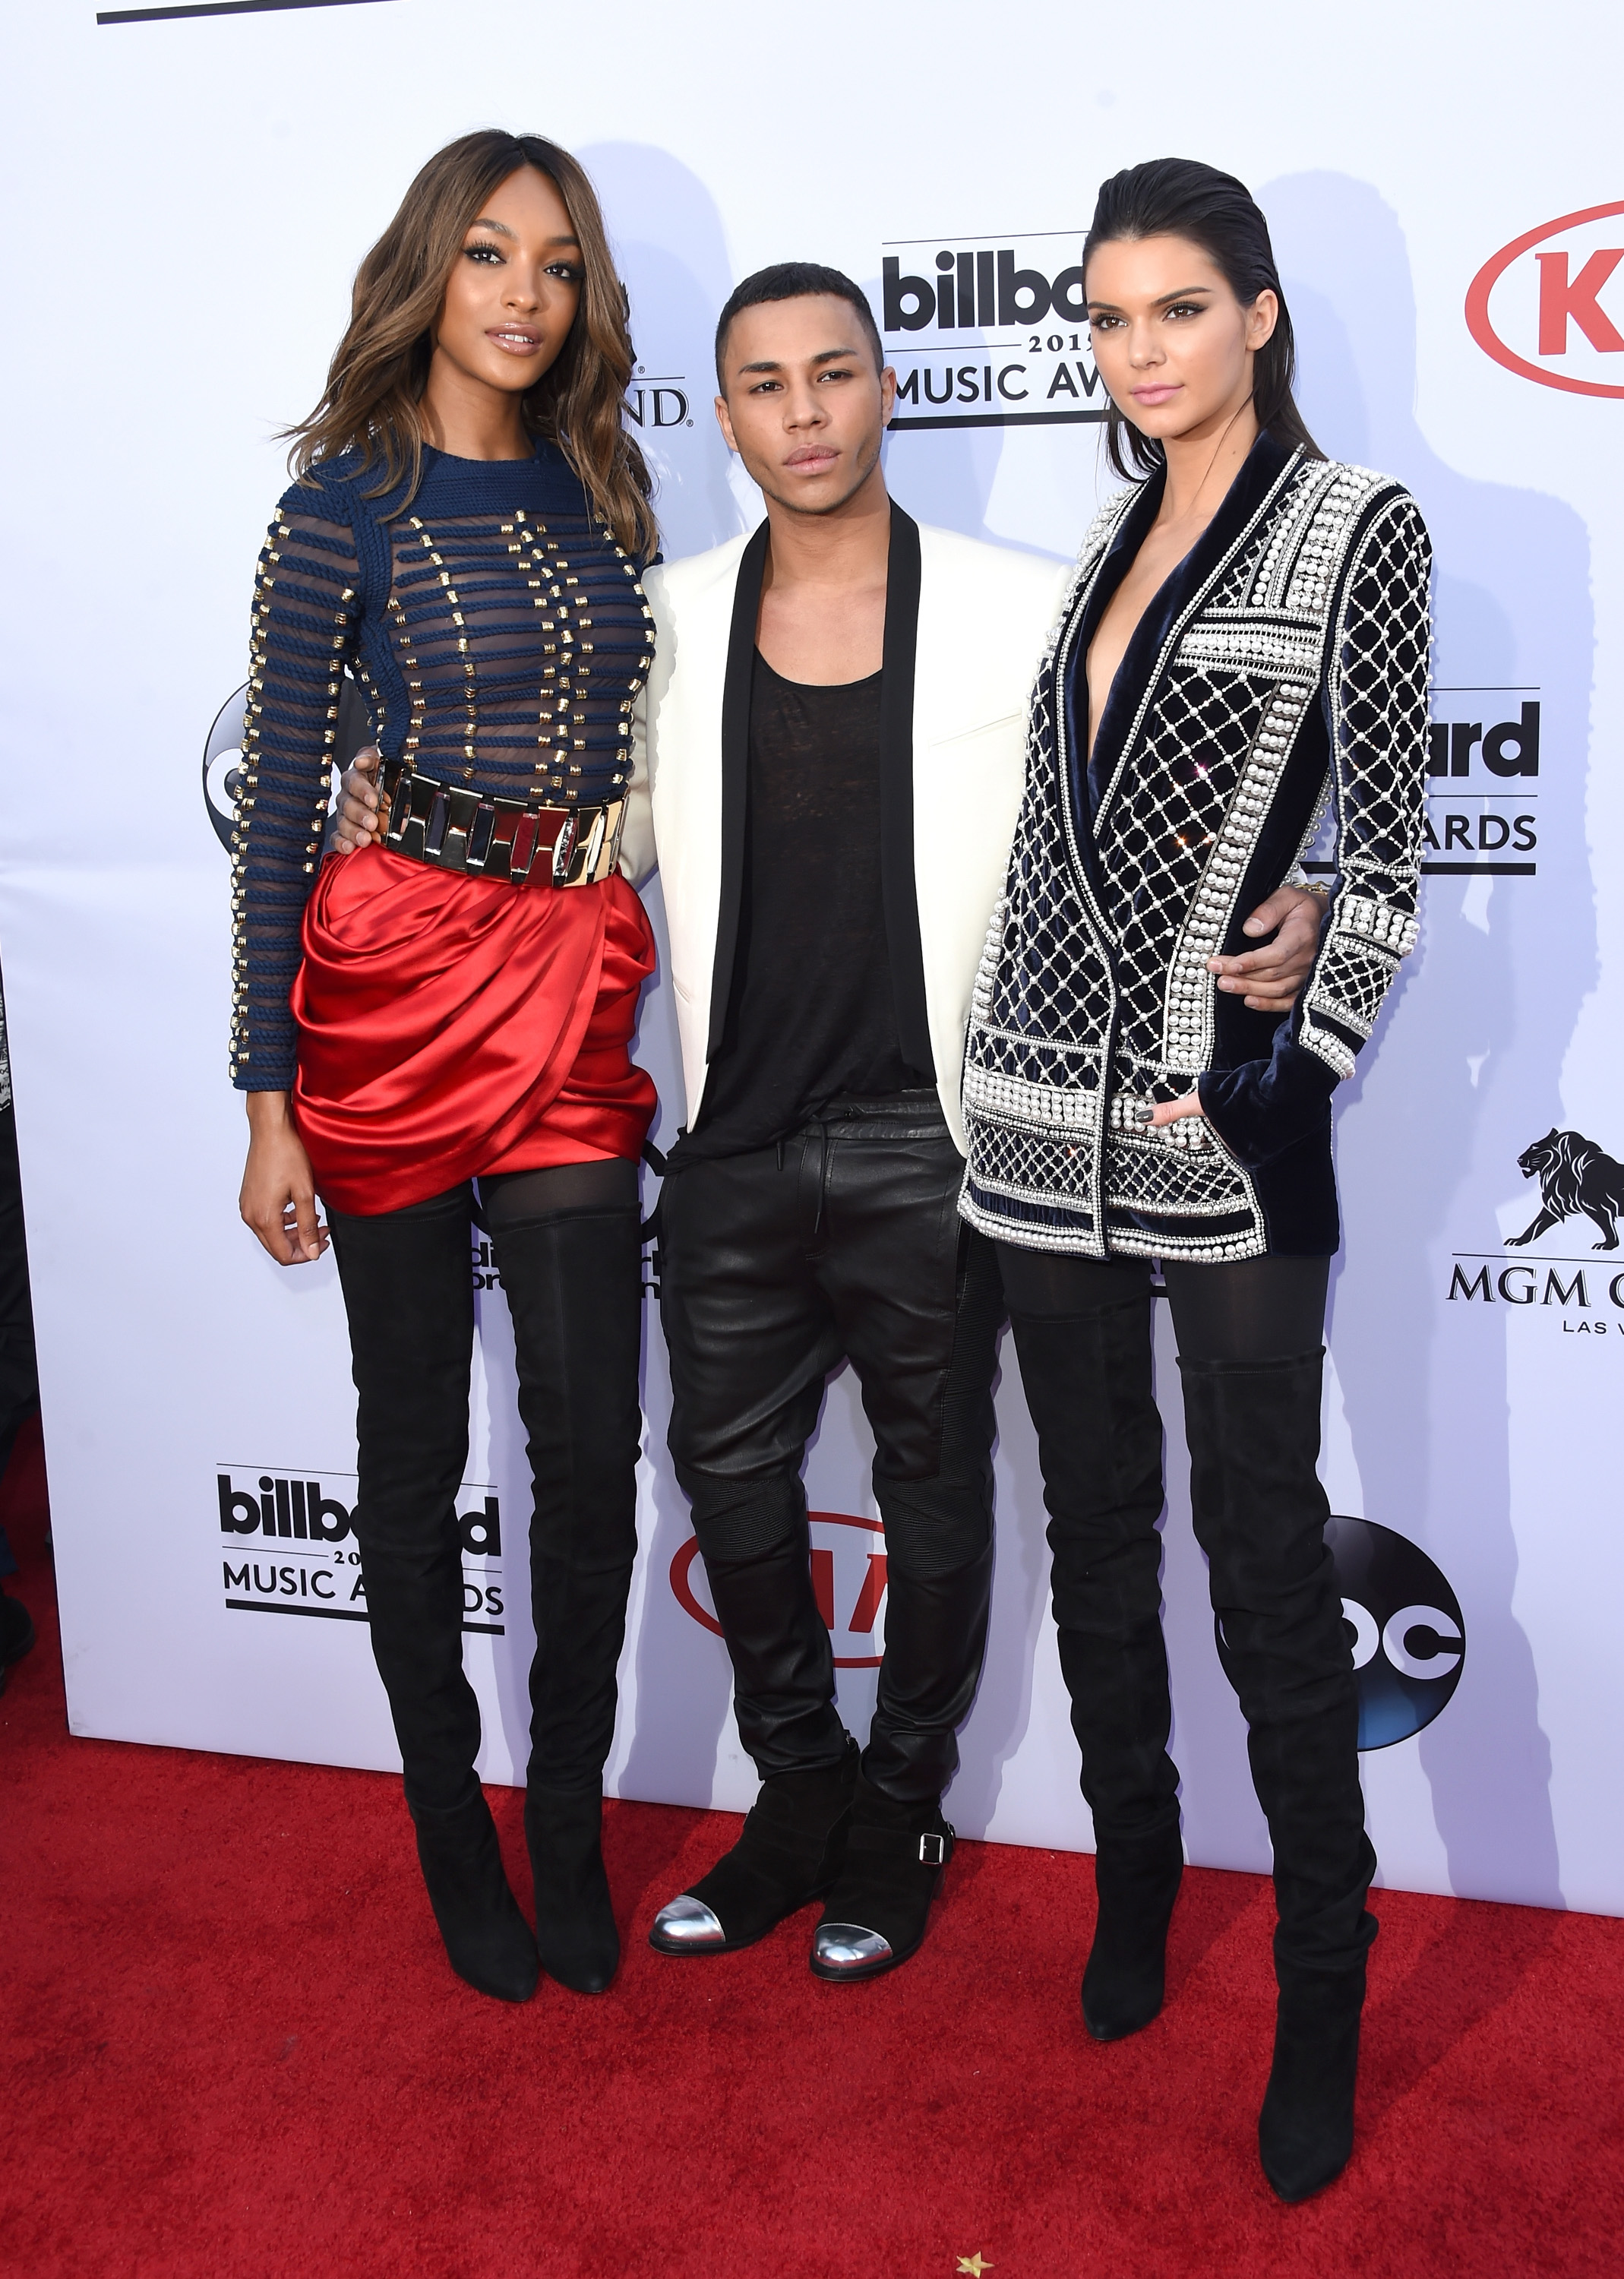 Olivier Rousteing Announces Balmain Collaboration With H&M - Daily Front Row